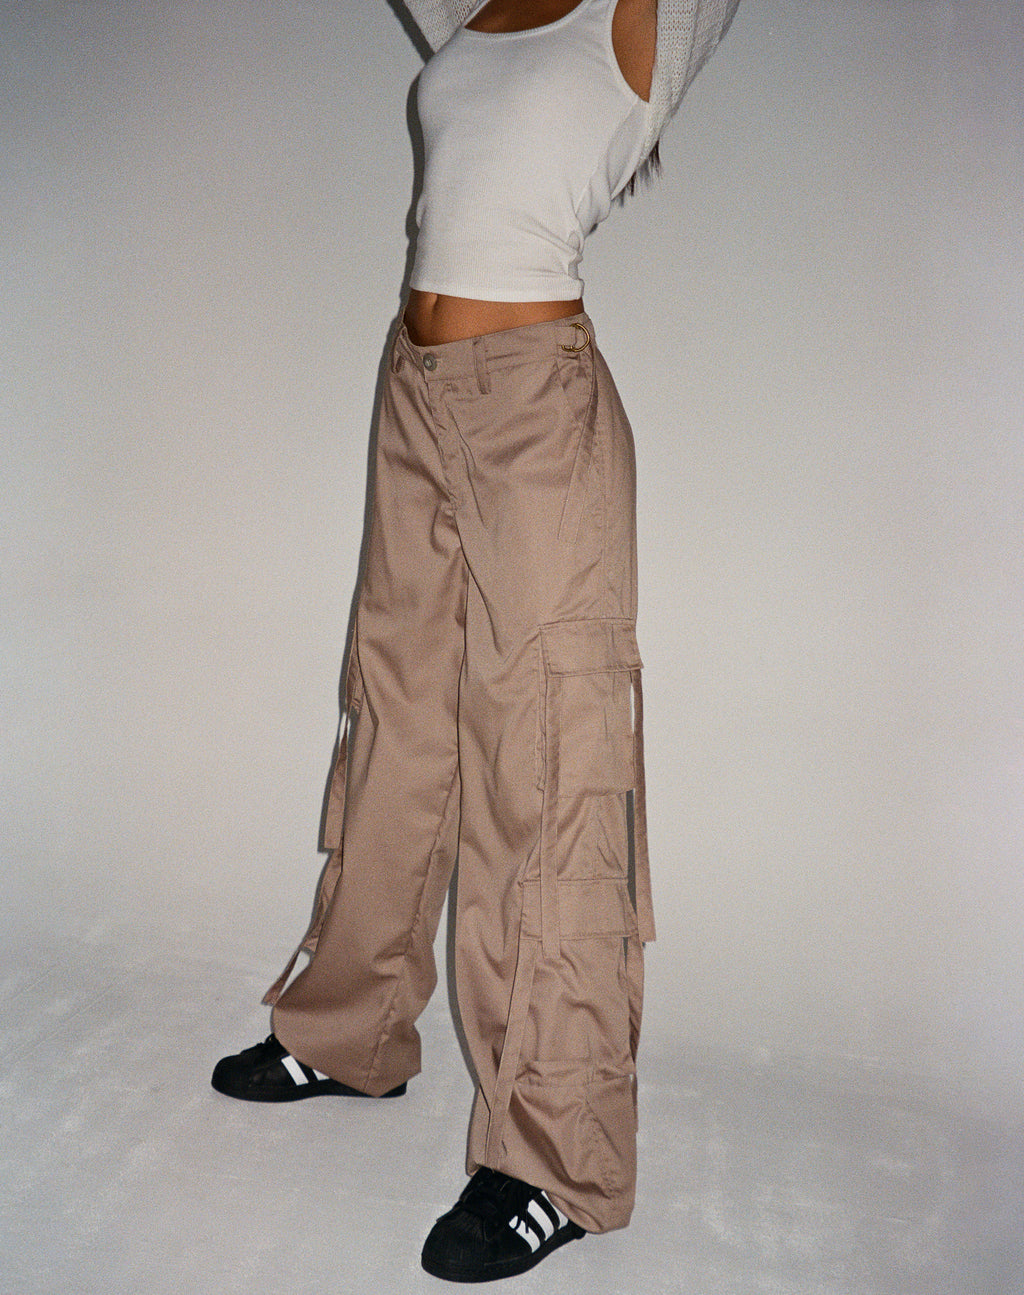 Edgar Wide Leg Cargo Trouser in Cotton Drill Taupe